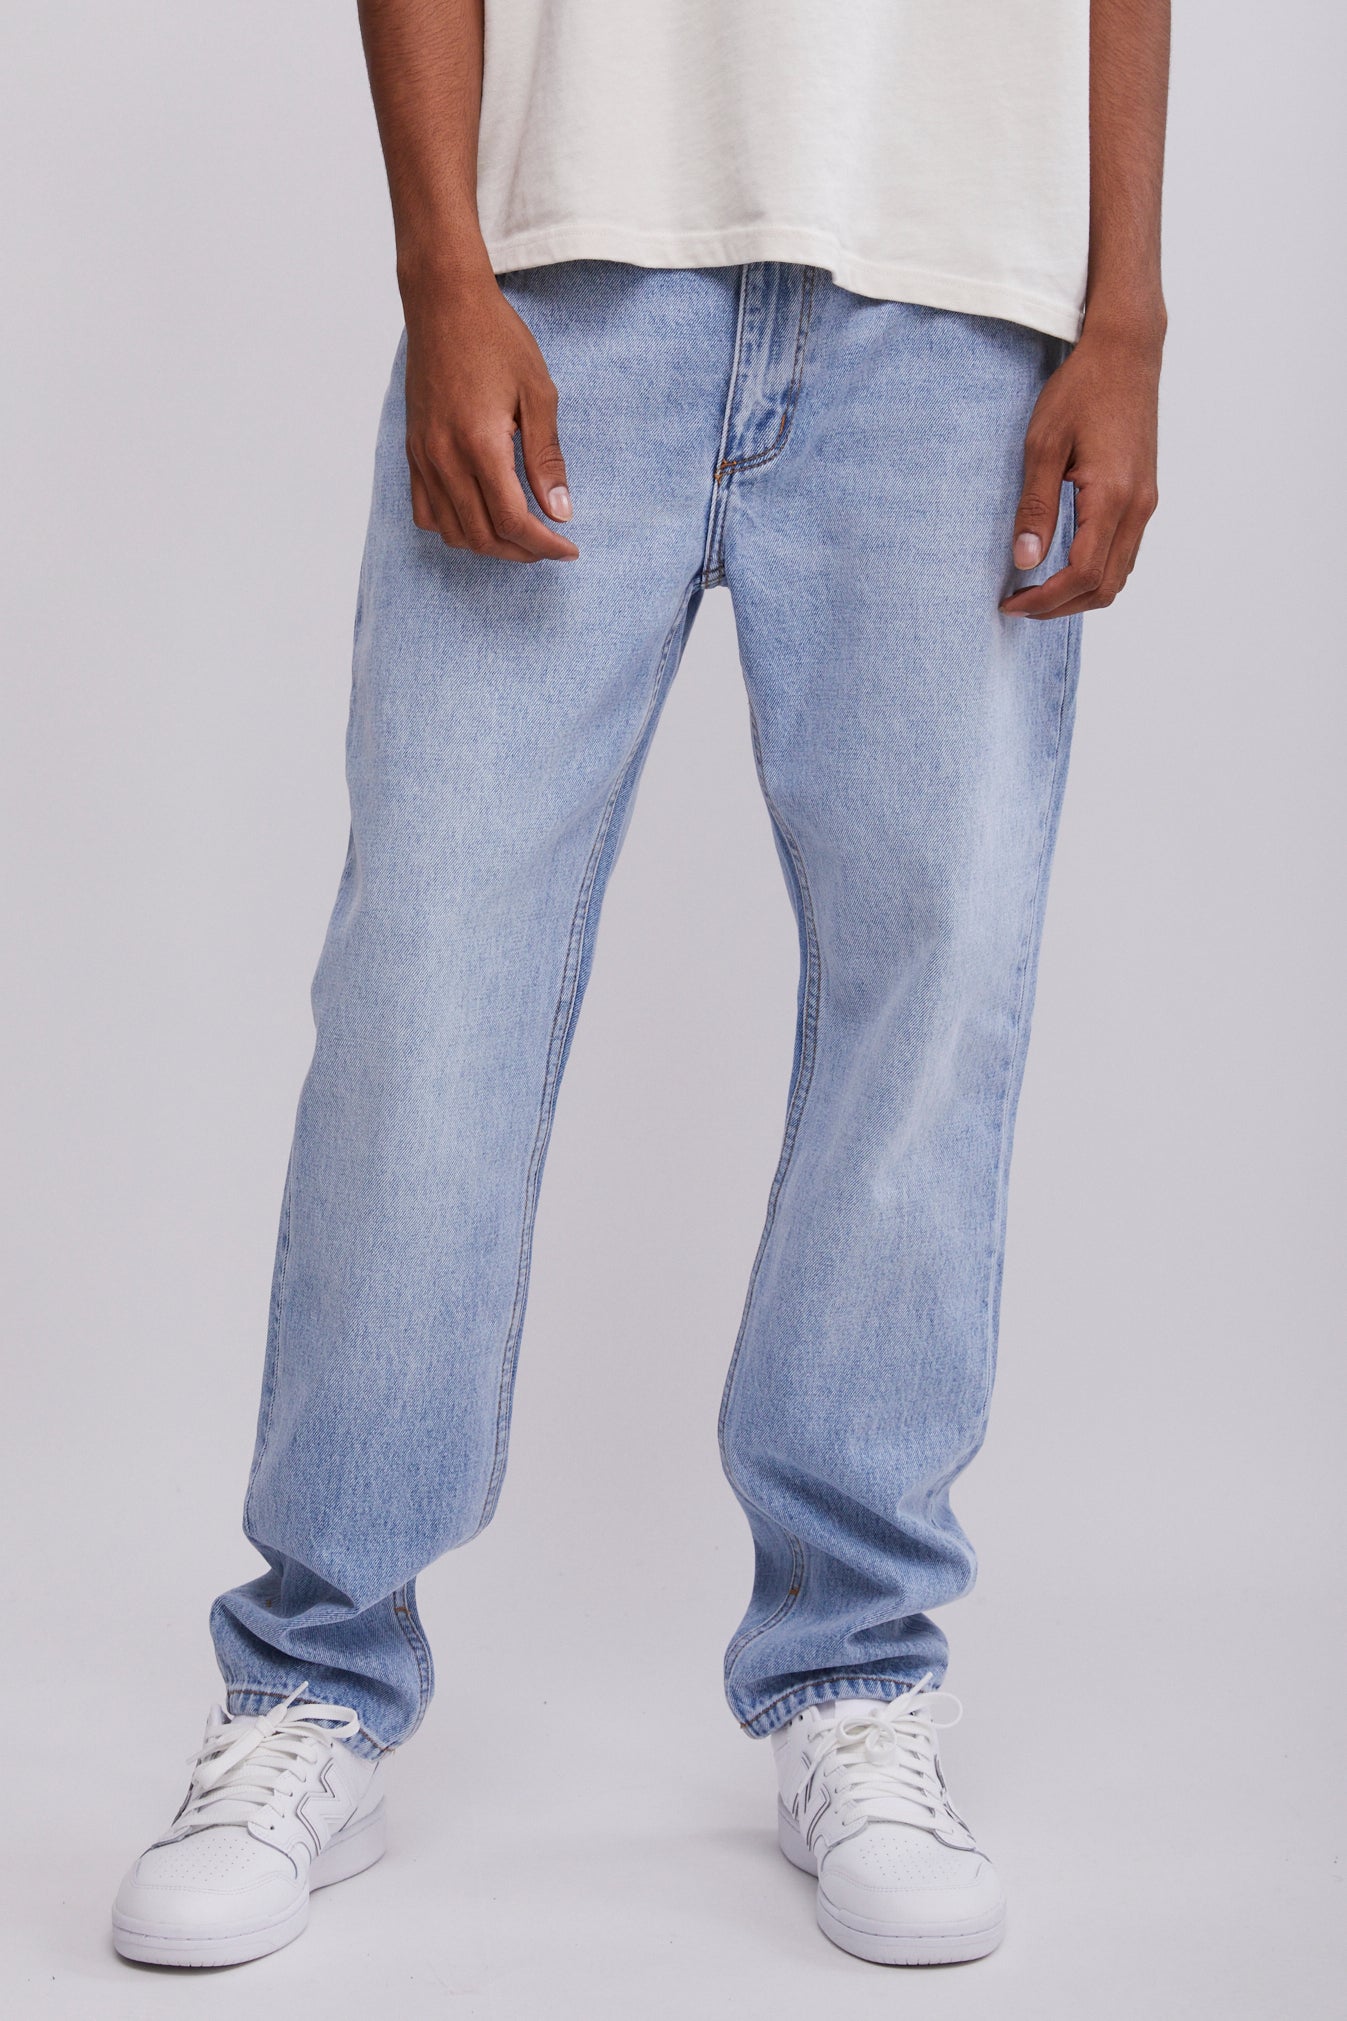 Relaxo Jeans | North Beach